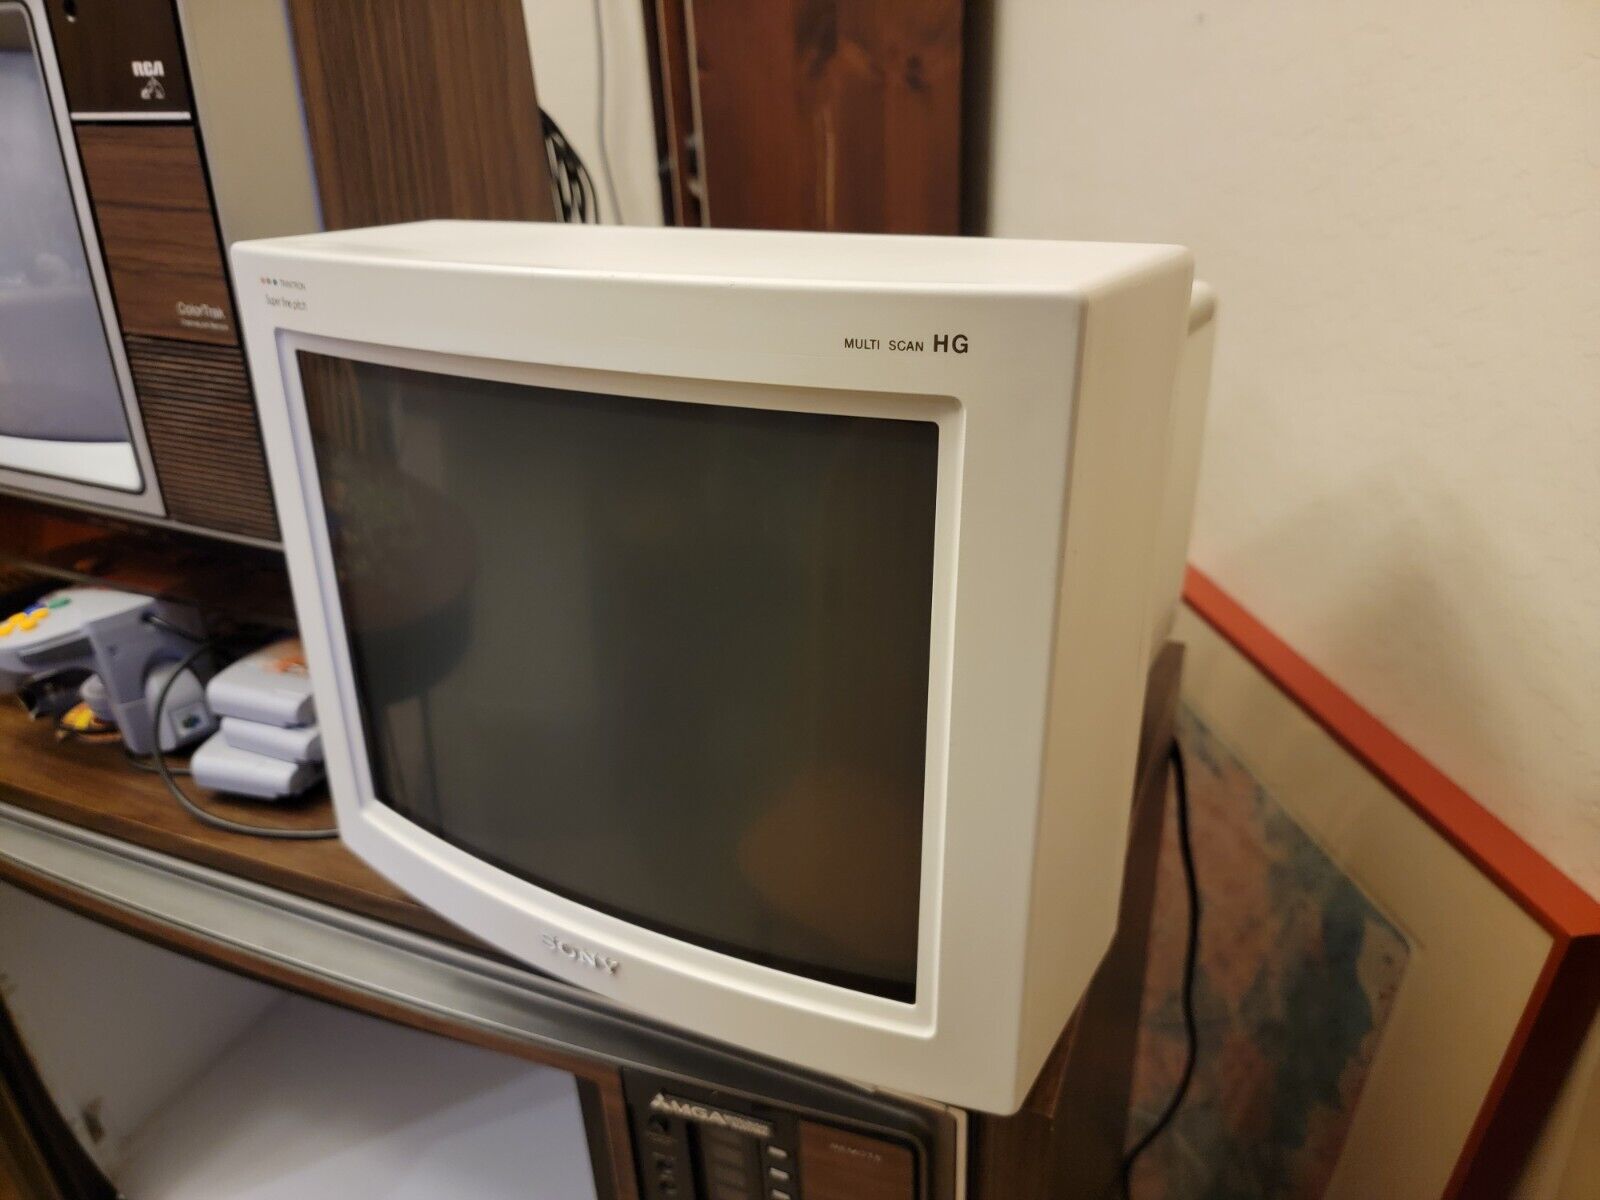 Sony Trinitron CPD-1304 9 PIN Analog Vintage CRT Monitor - Great for Retro PC